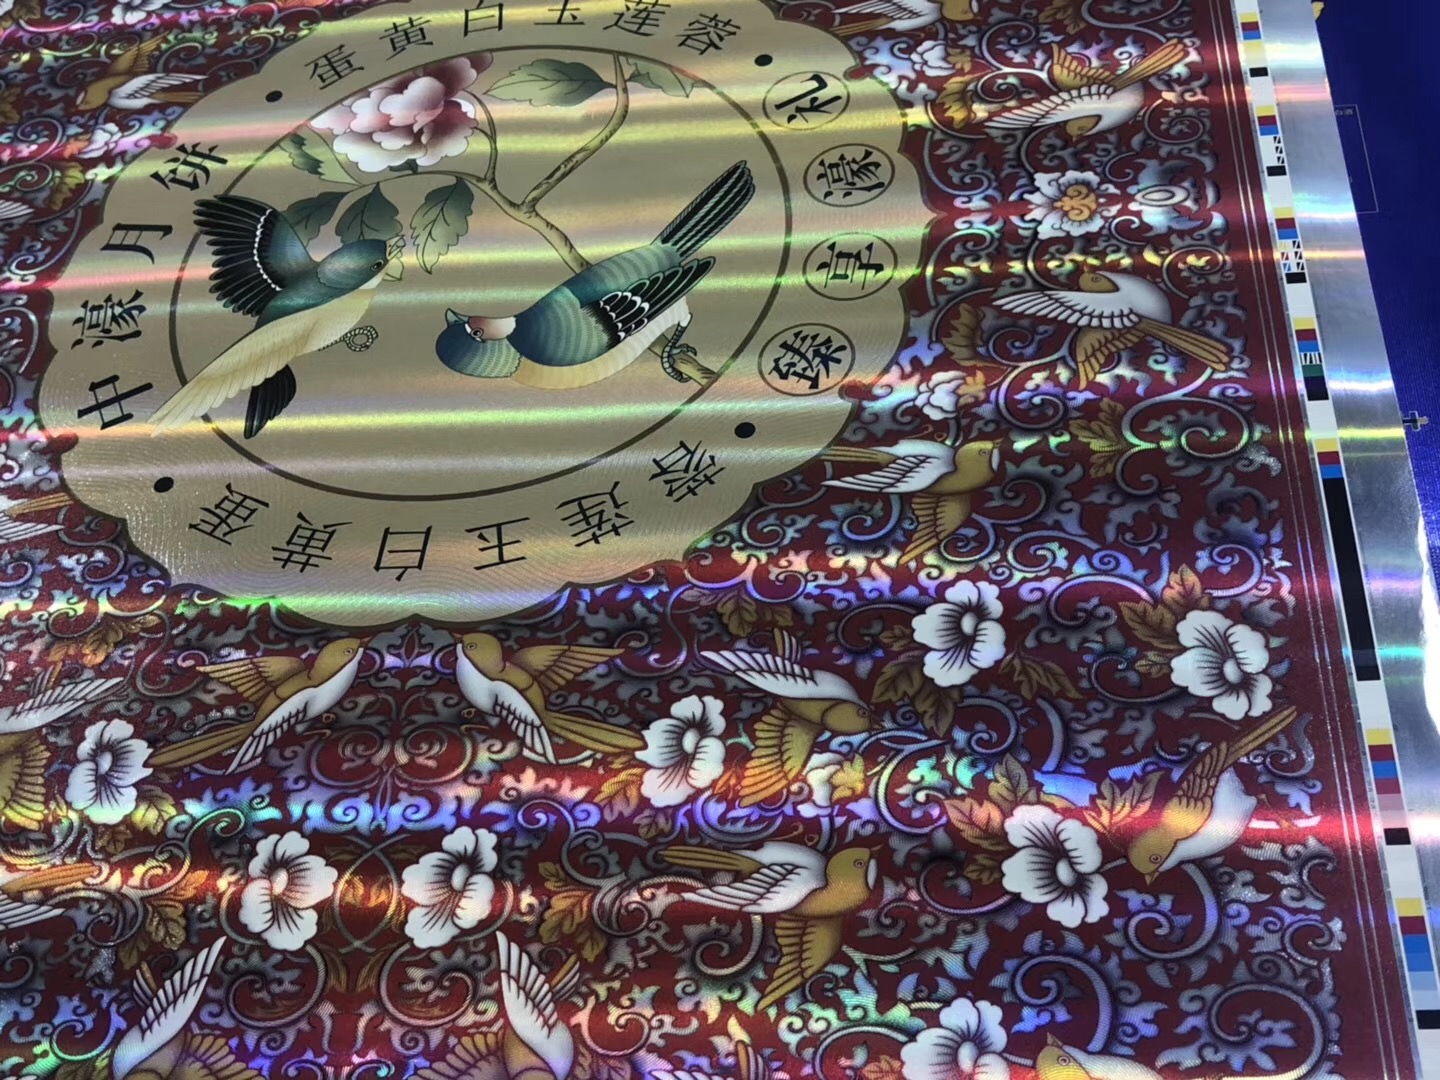 Holographic metallized film-Productos-Wenzhou Zhanxin New